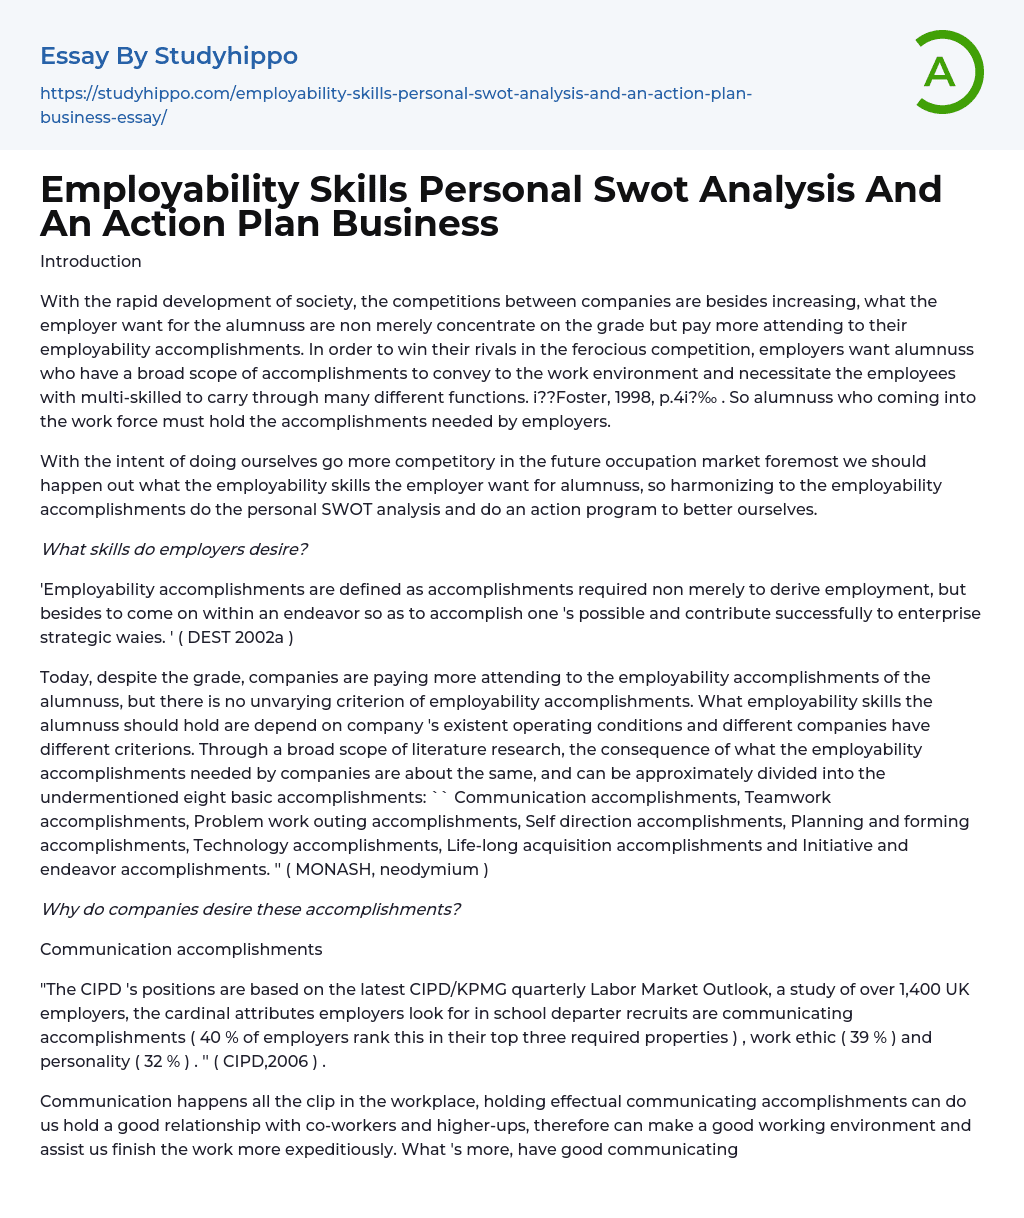 Employability Skills Personal Swot Analysis And An Action Plan Business Essay Example